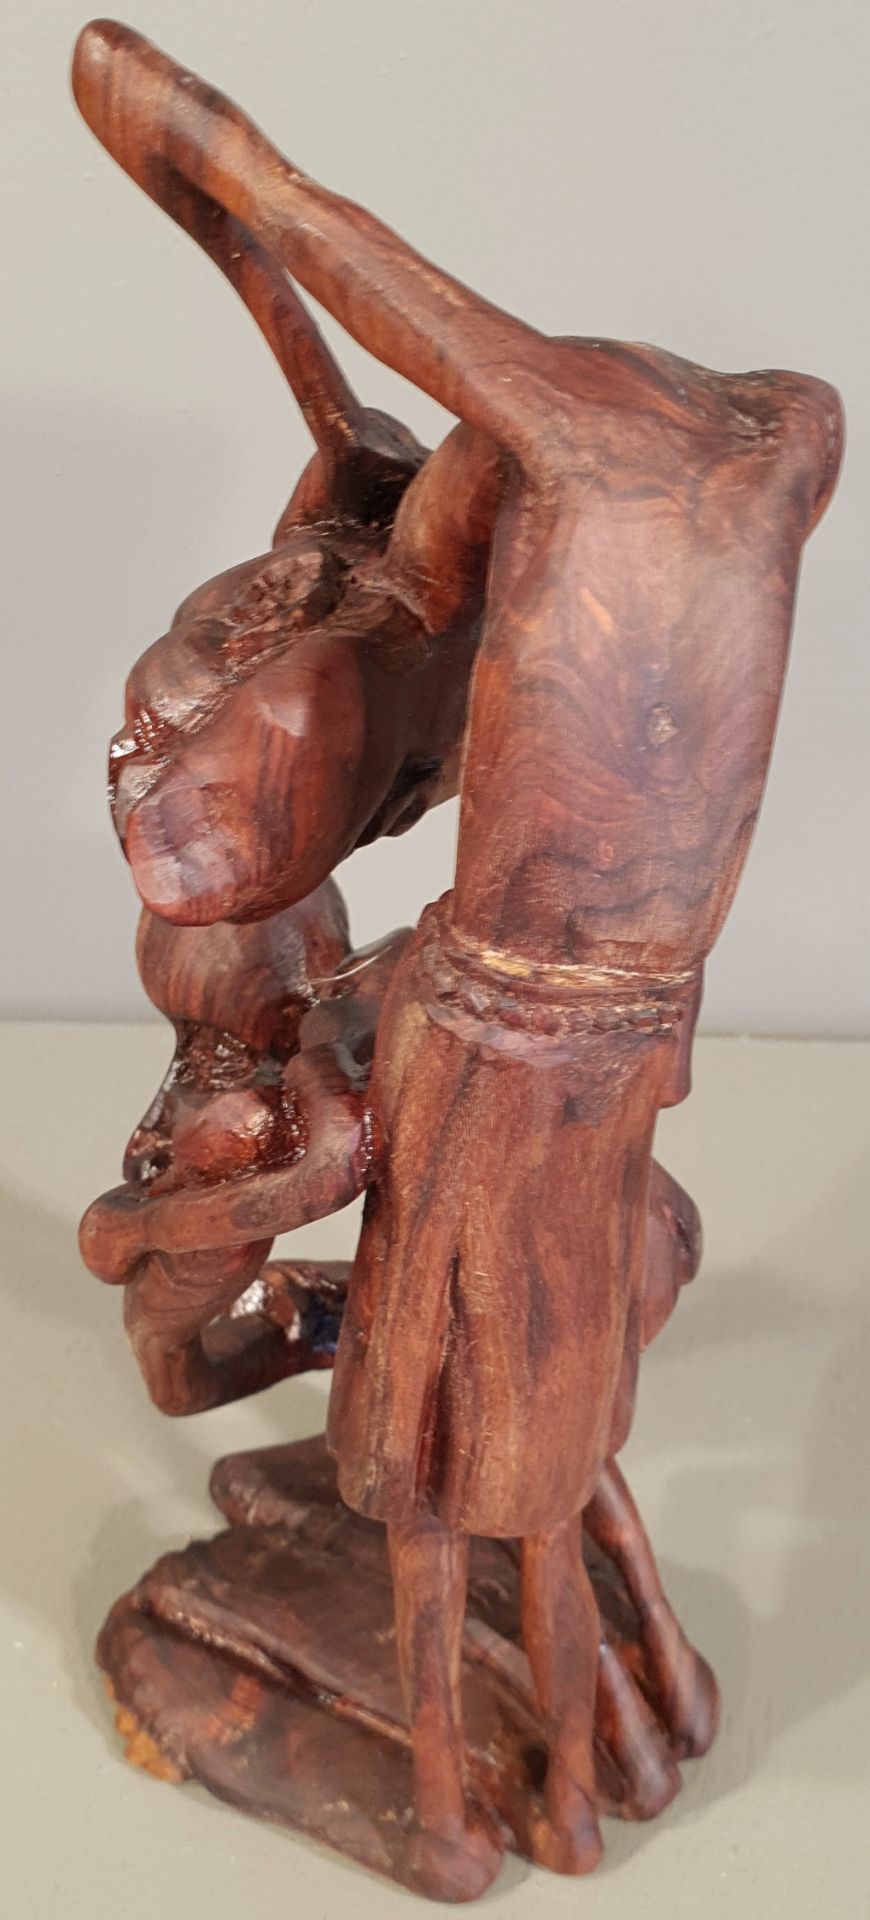 Vintage African Wooden Carved Sculpture Signed to The Base - Image 2 of 4